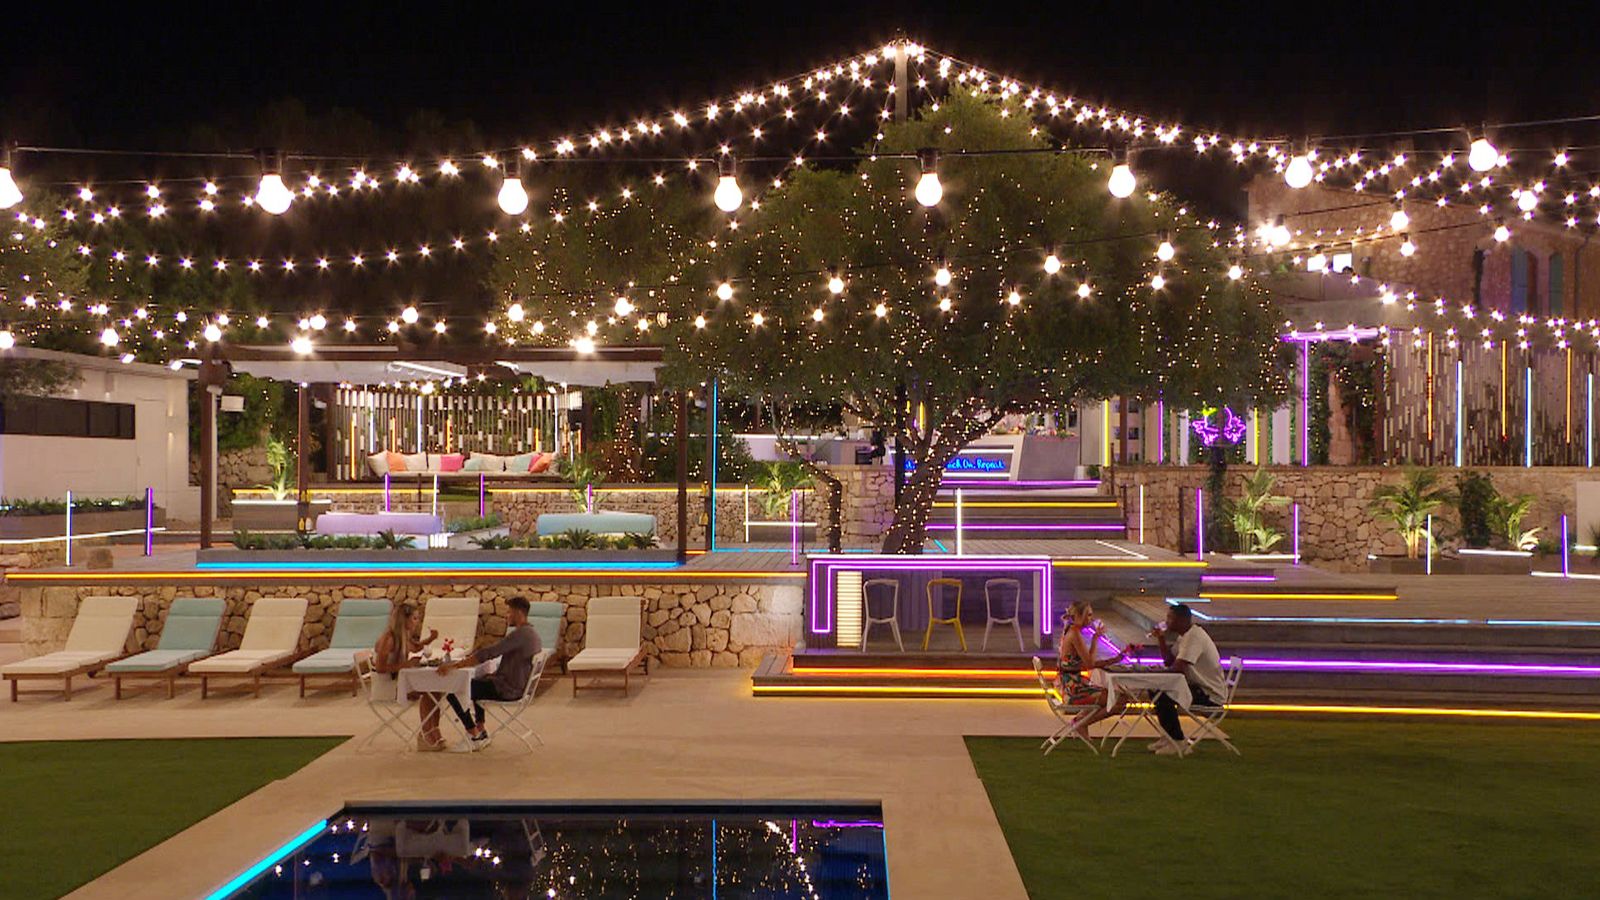 Love Island intruder removed from villa in Majorca after breaching security overnight